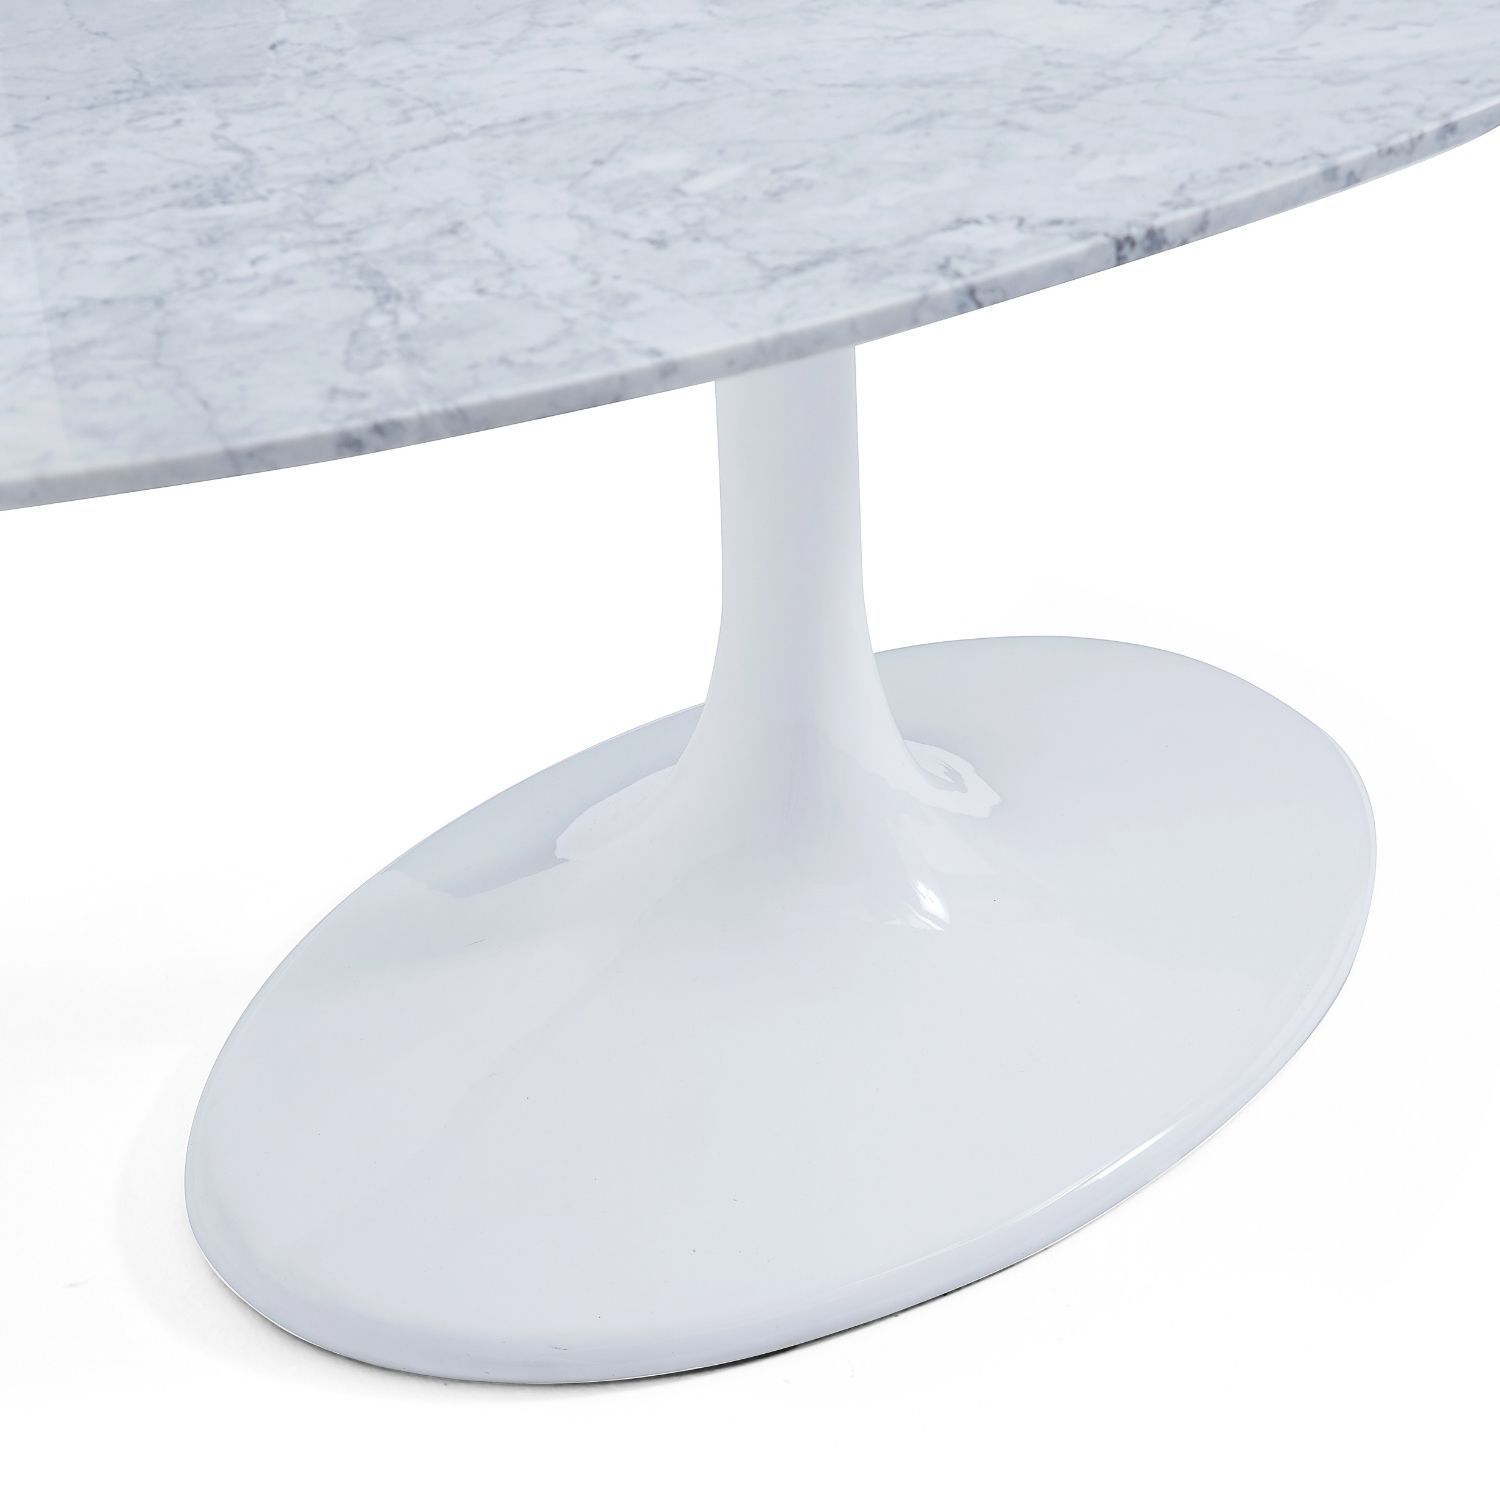 Mella Dining Table | Valyou Furniture